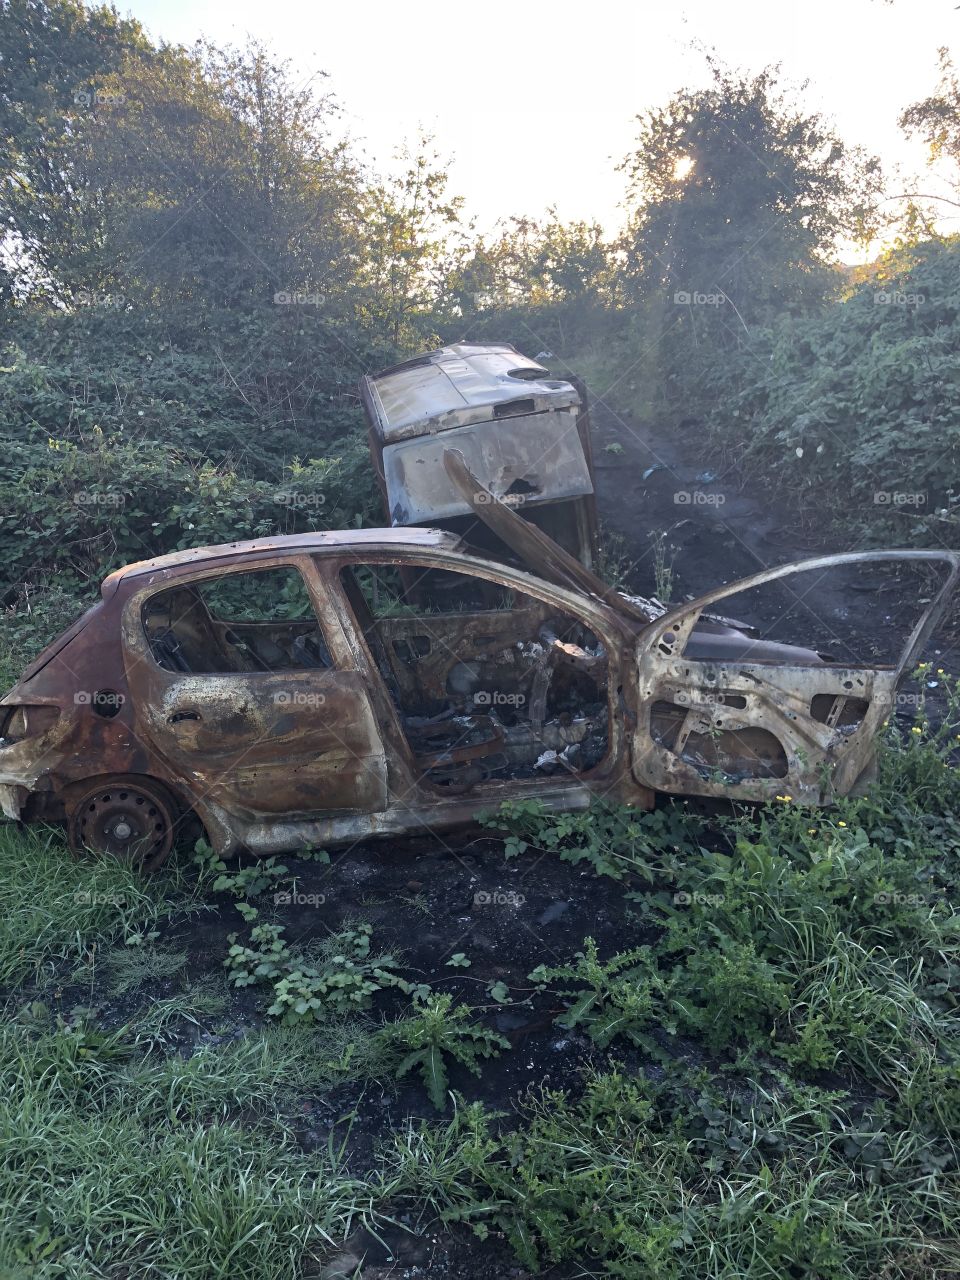 Another burnt out dumped car